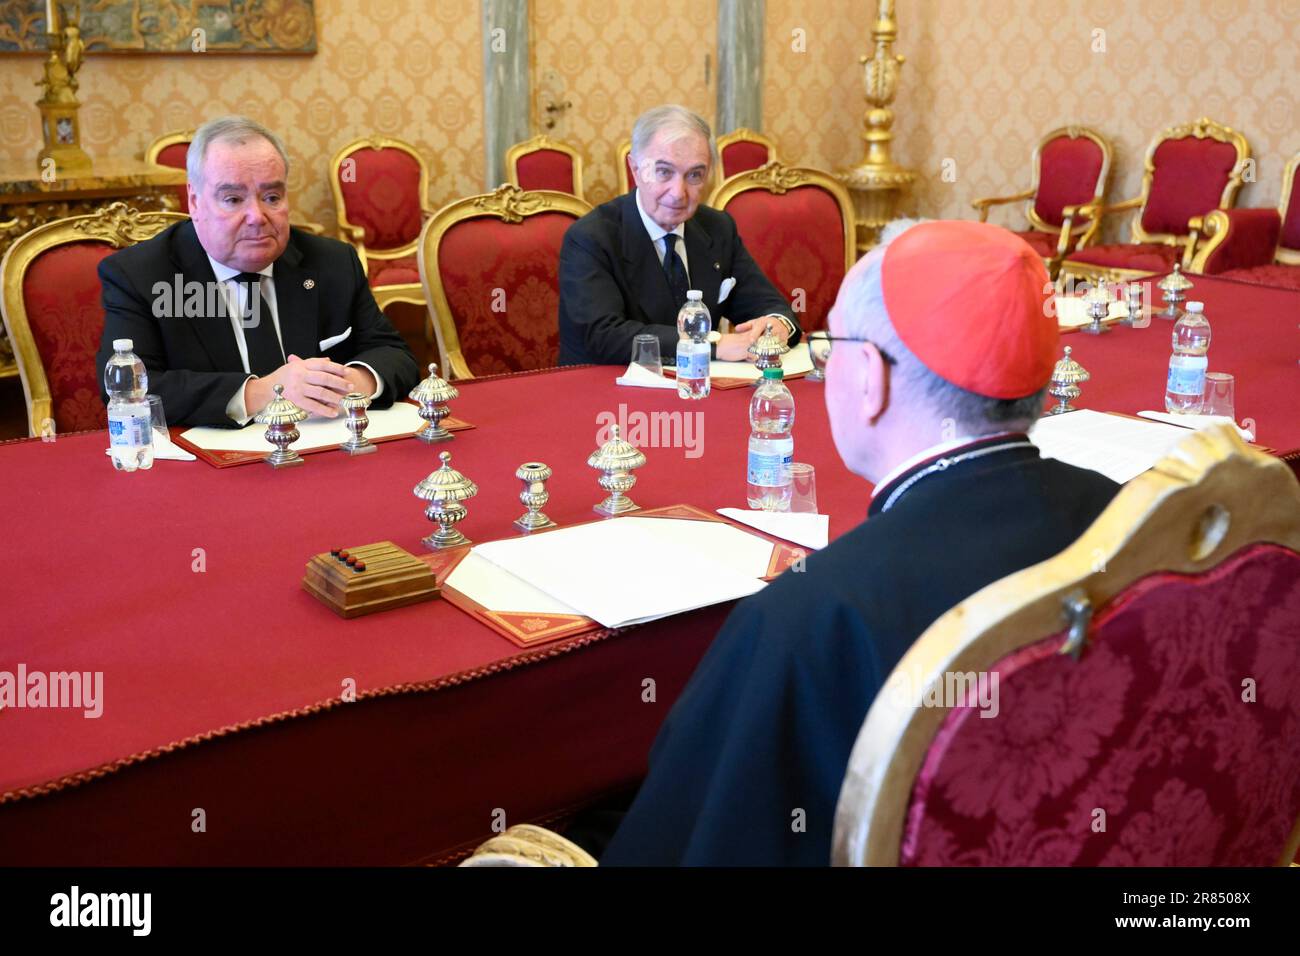 Italy, Rome, Vatican, 19-06-2023 His Most Eminent Highness Fra' John T. Dunlap, Prince and Grand Master of the Sovereign Military Order of Malta 19-06-2023 Sua Altezza Eminentissima Fra' John T. Dunlap, Principe e Gran Maestro del Sovrano Militare Ordine di Malta Photograph by Vatican Media /Catholic Press Photo/IPA RESTRICTED TO EDITORIAL USE - NO MARKETING - NO ADVERTISING CAMPAIGNS Stock Photo